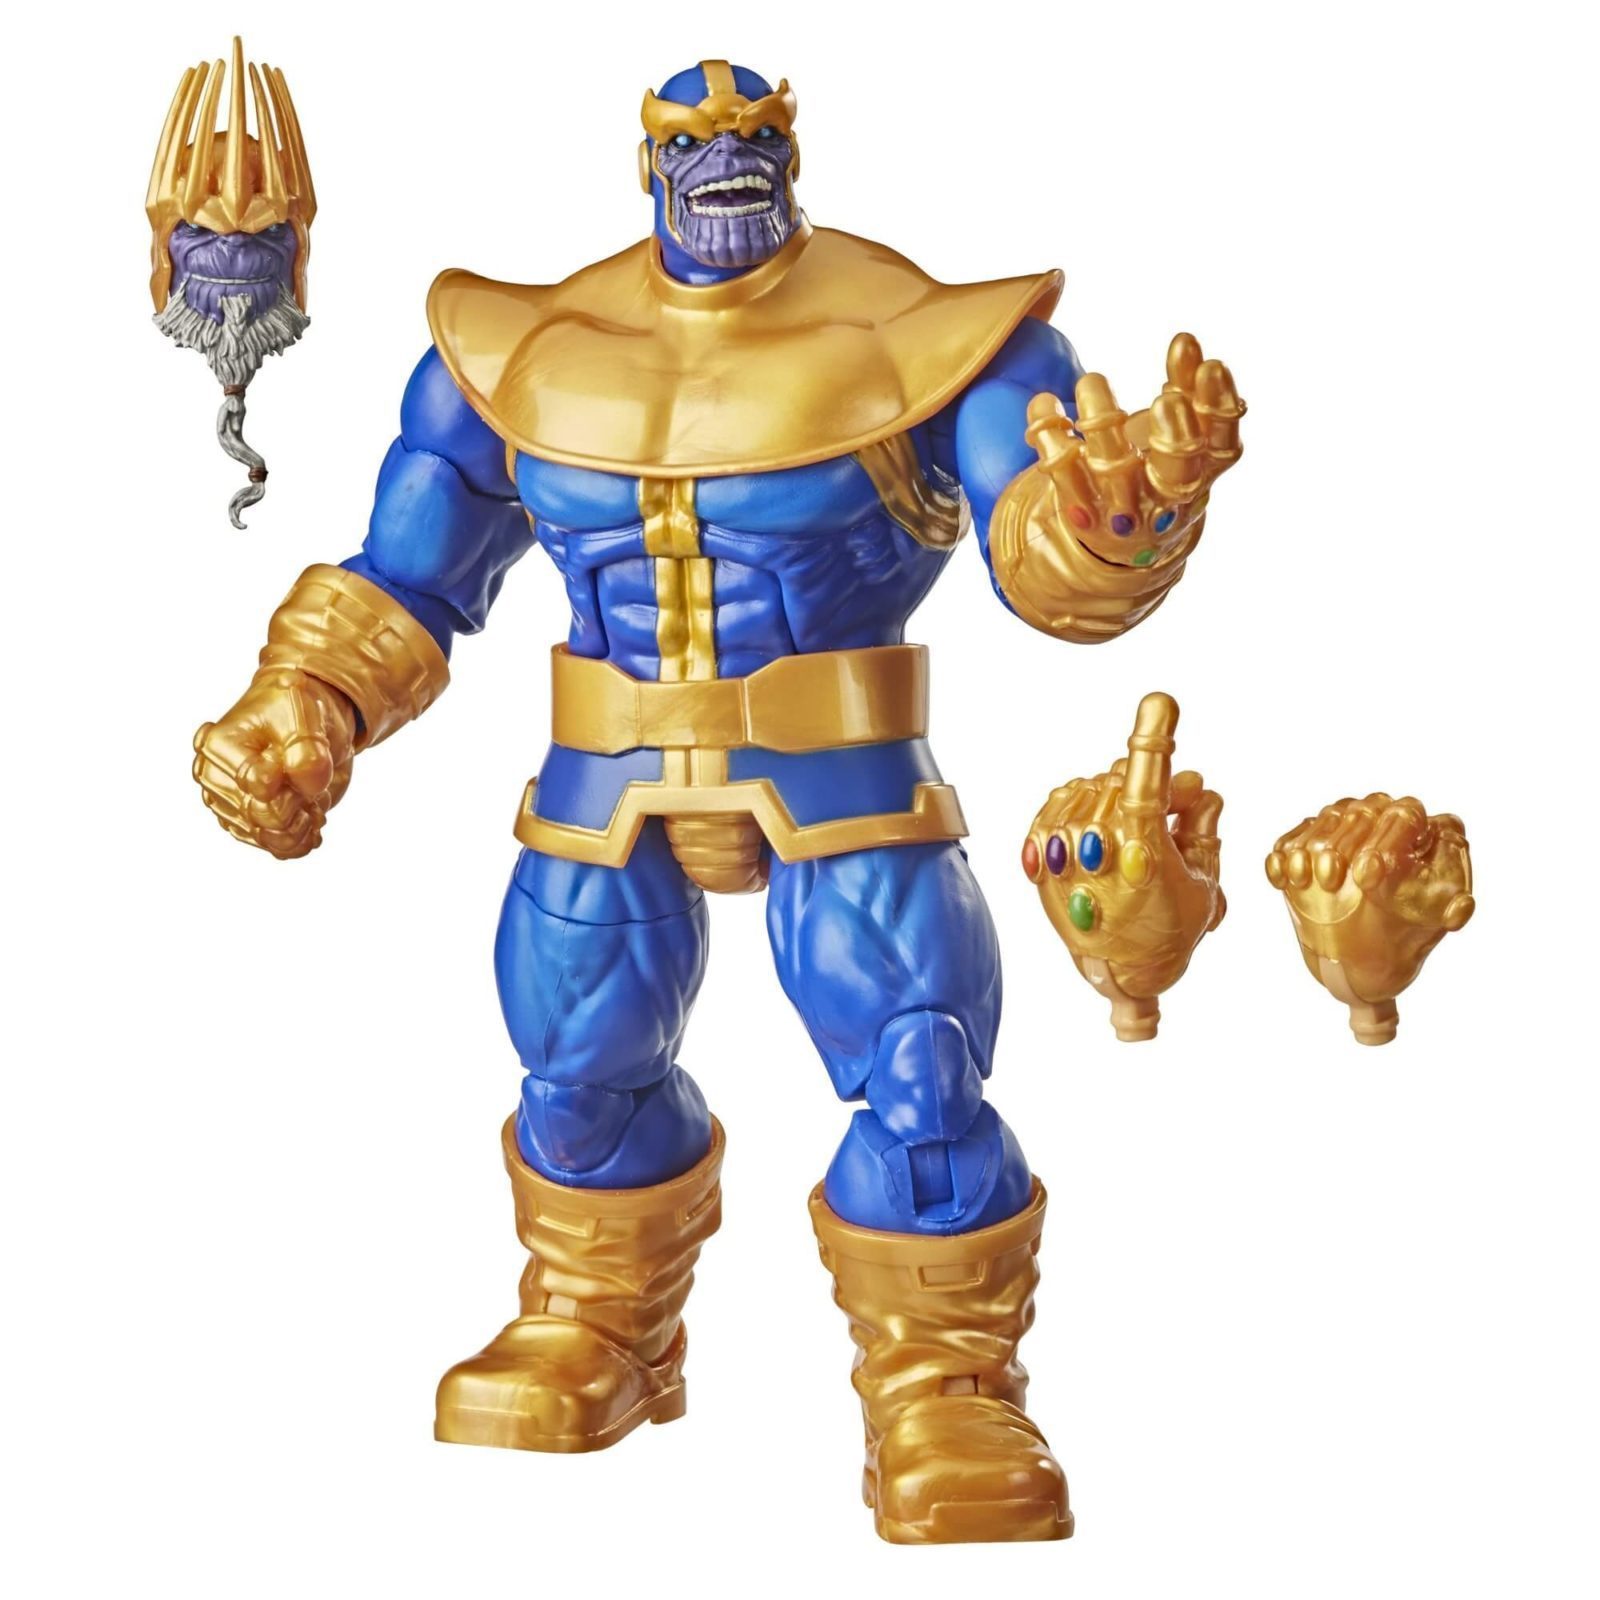 Thanos The Infinity Gauntlet Marvel Legends Series